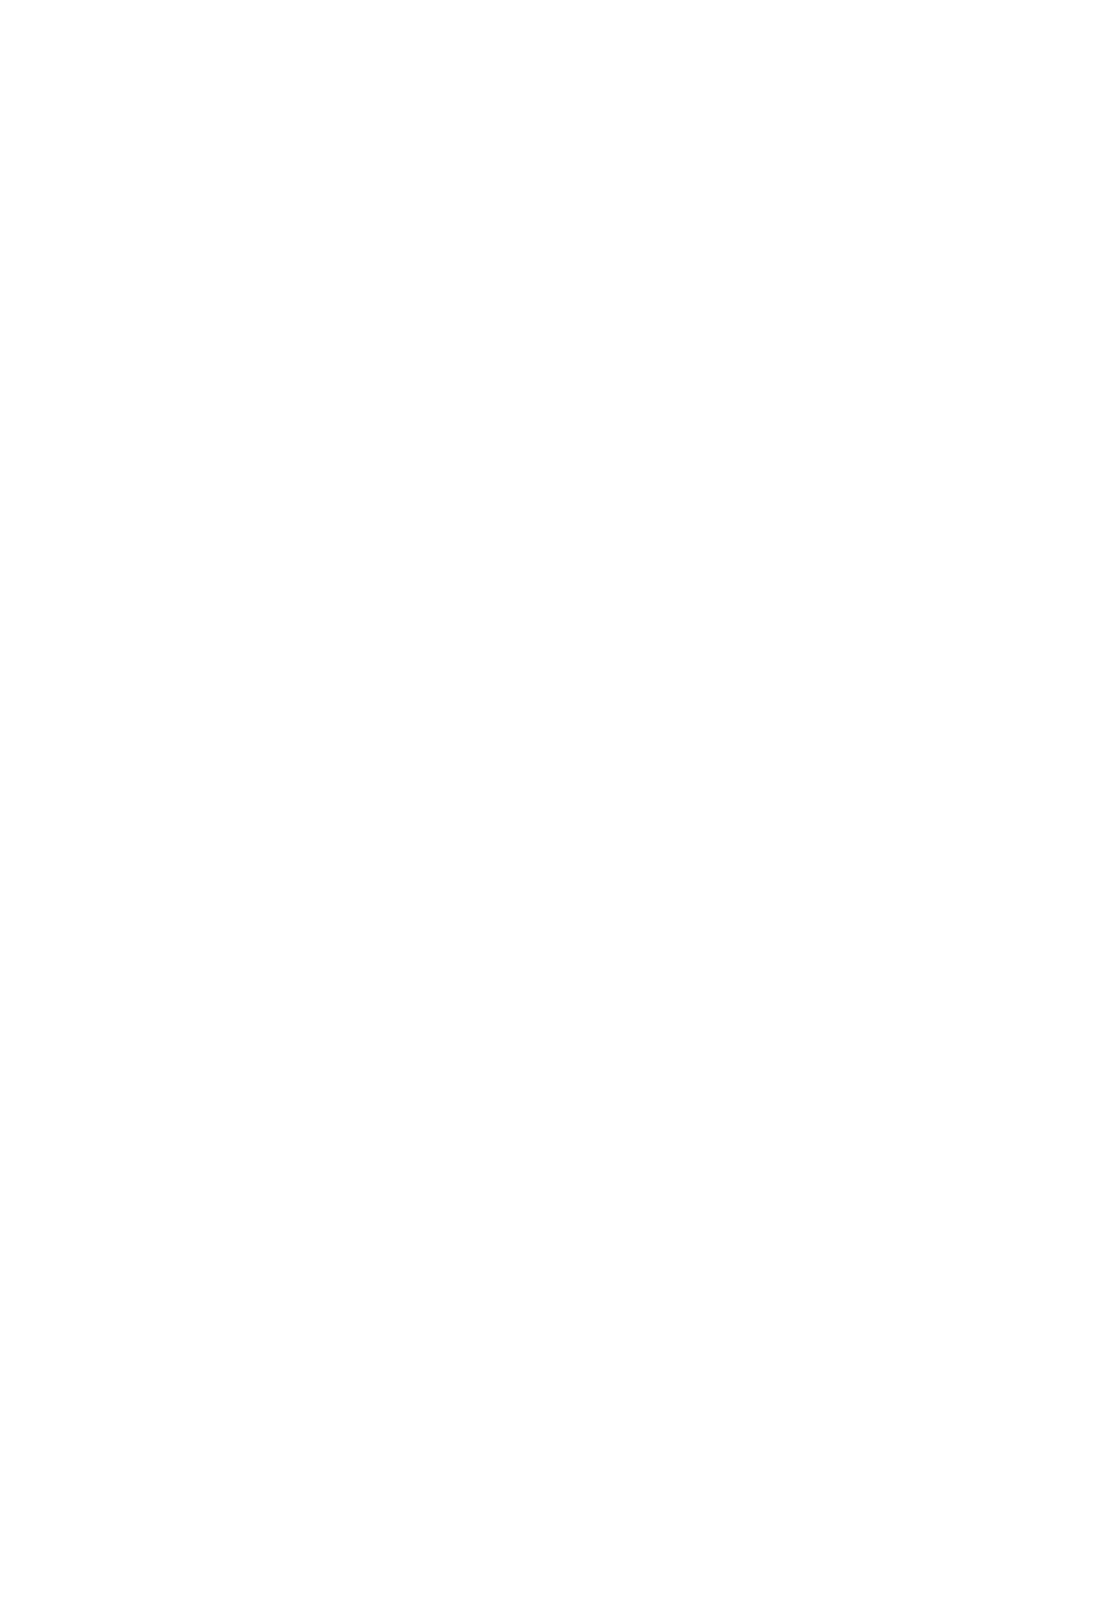 ⚽ Step into the Boots of Your Player in “Man of the Match”! 🕹️